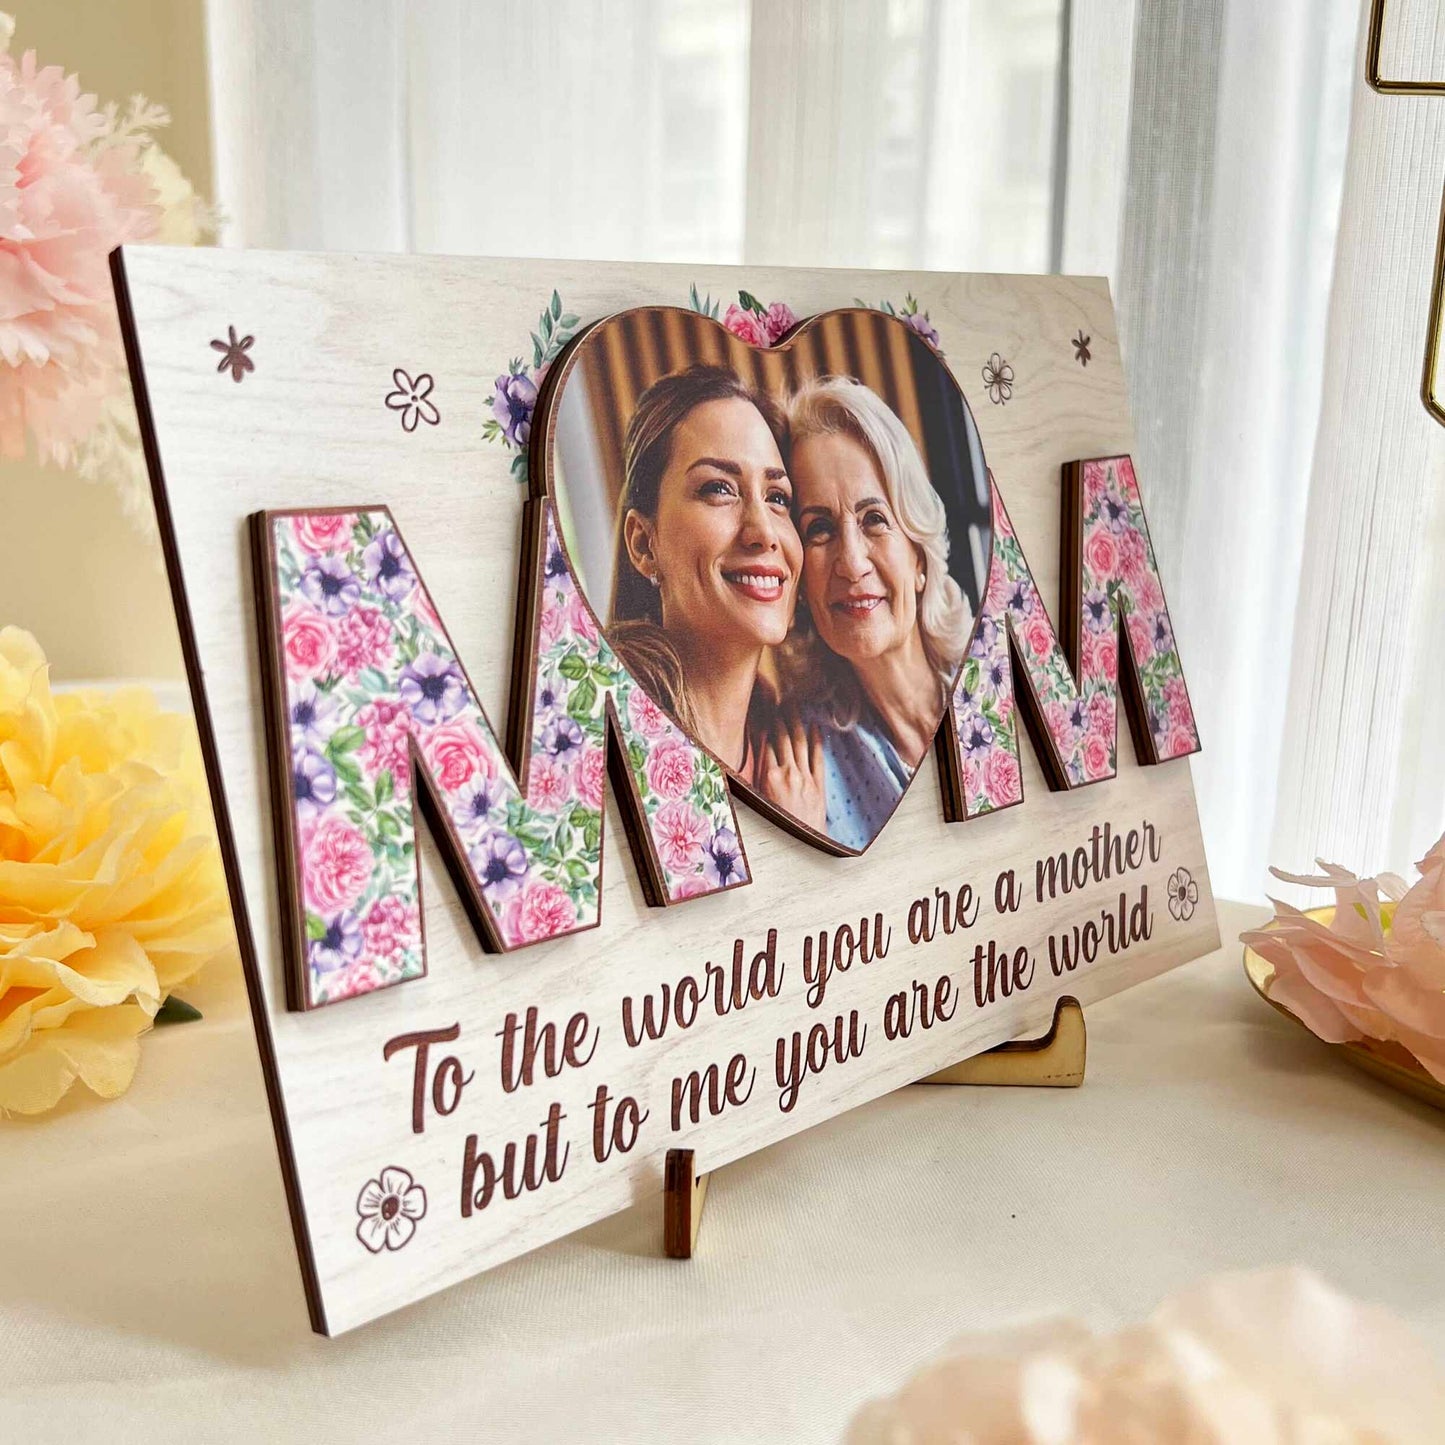 To Us You Are The World - Personalized Wooden Photo Plaque